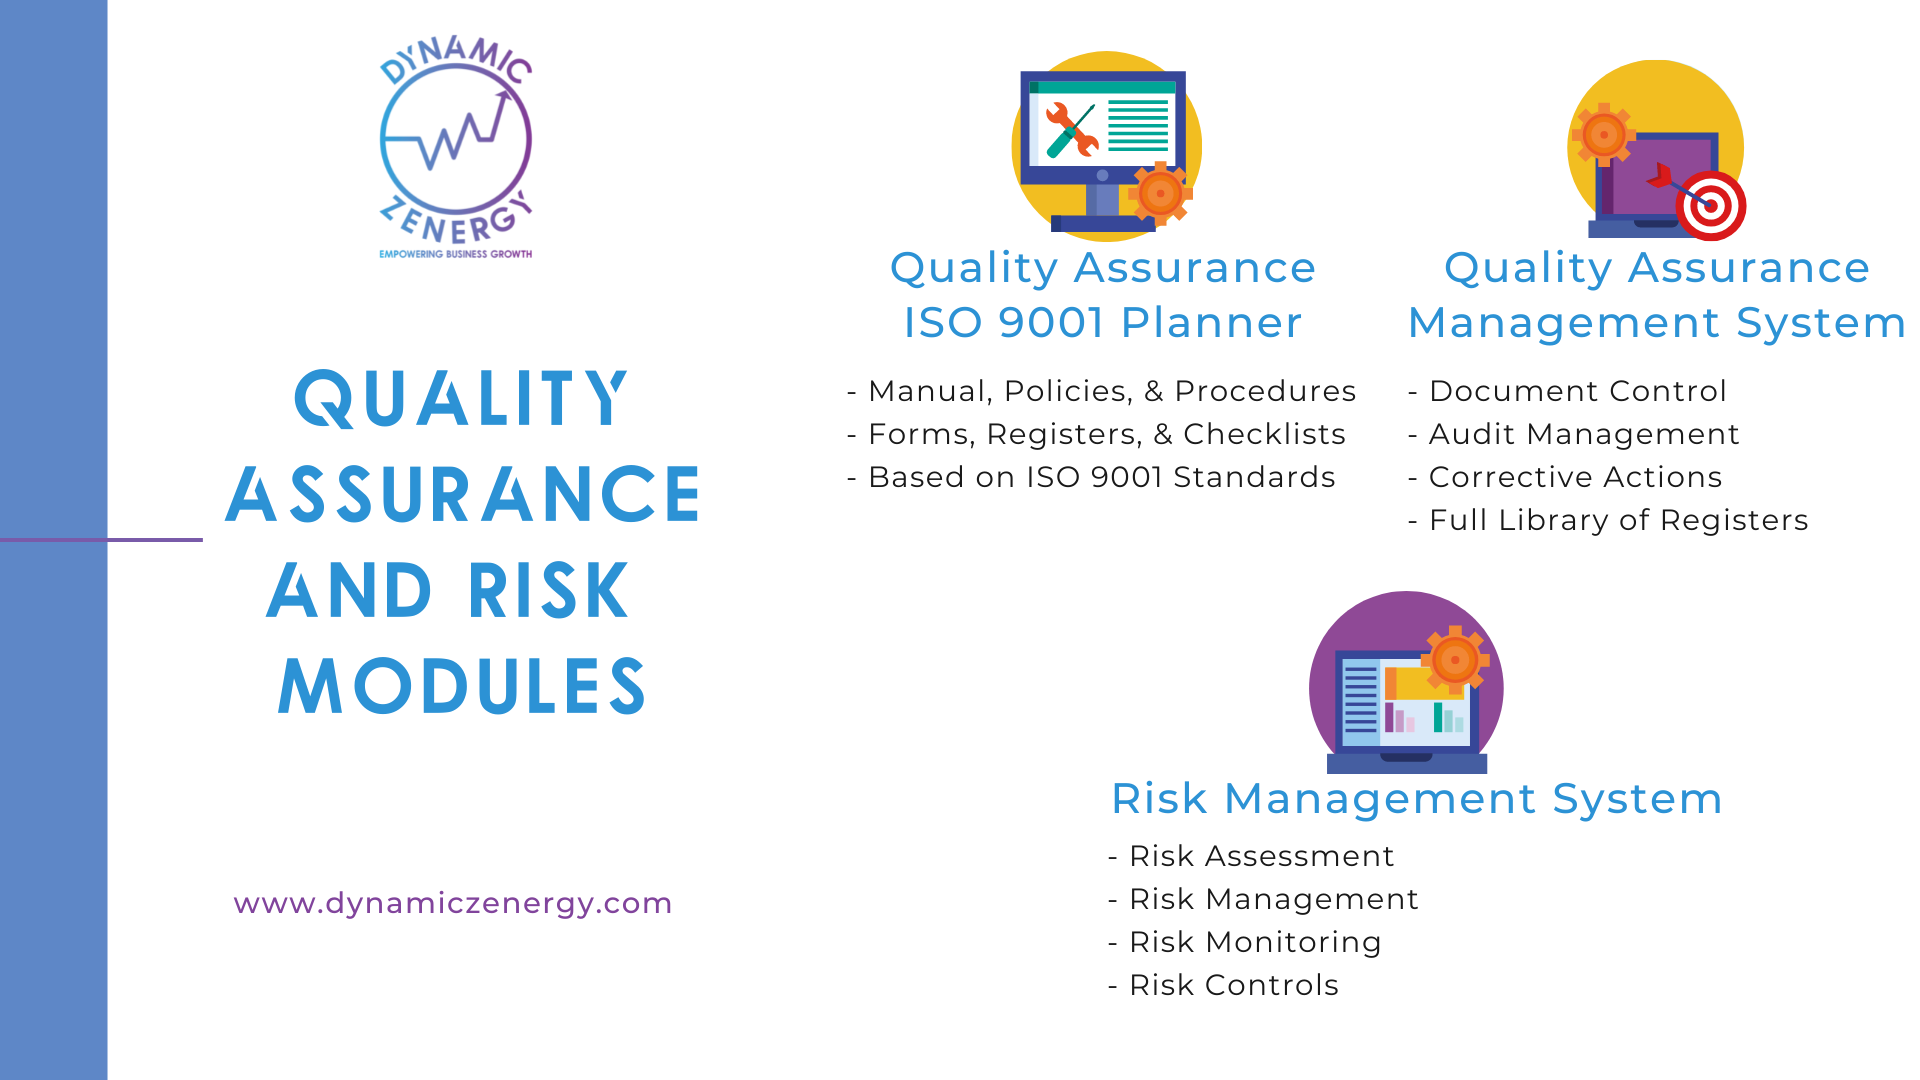 Maus Quality Assurance and Risk Modules